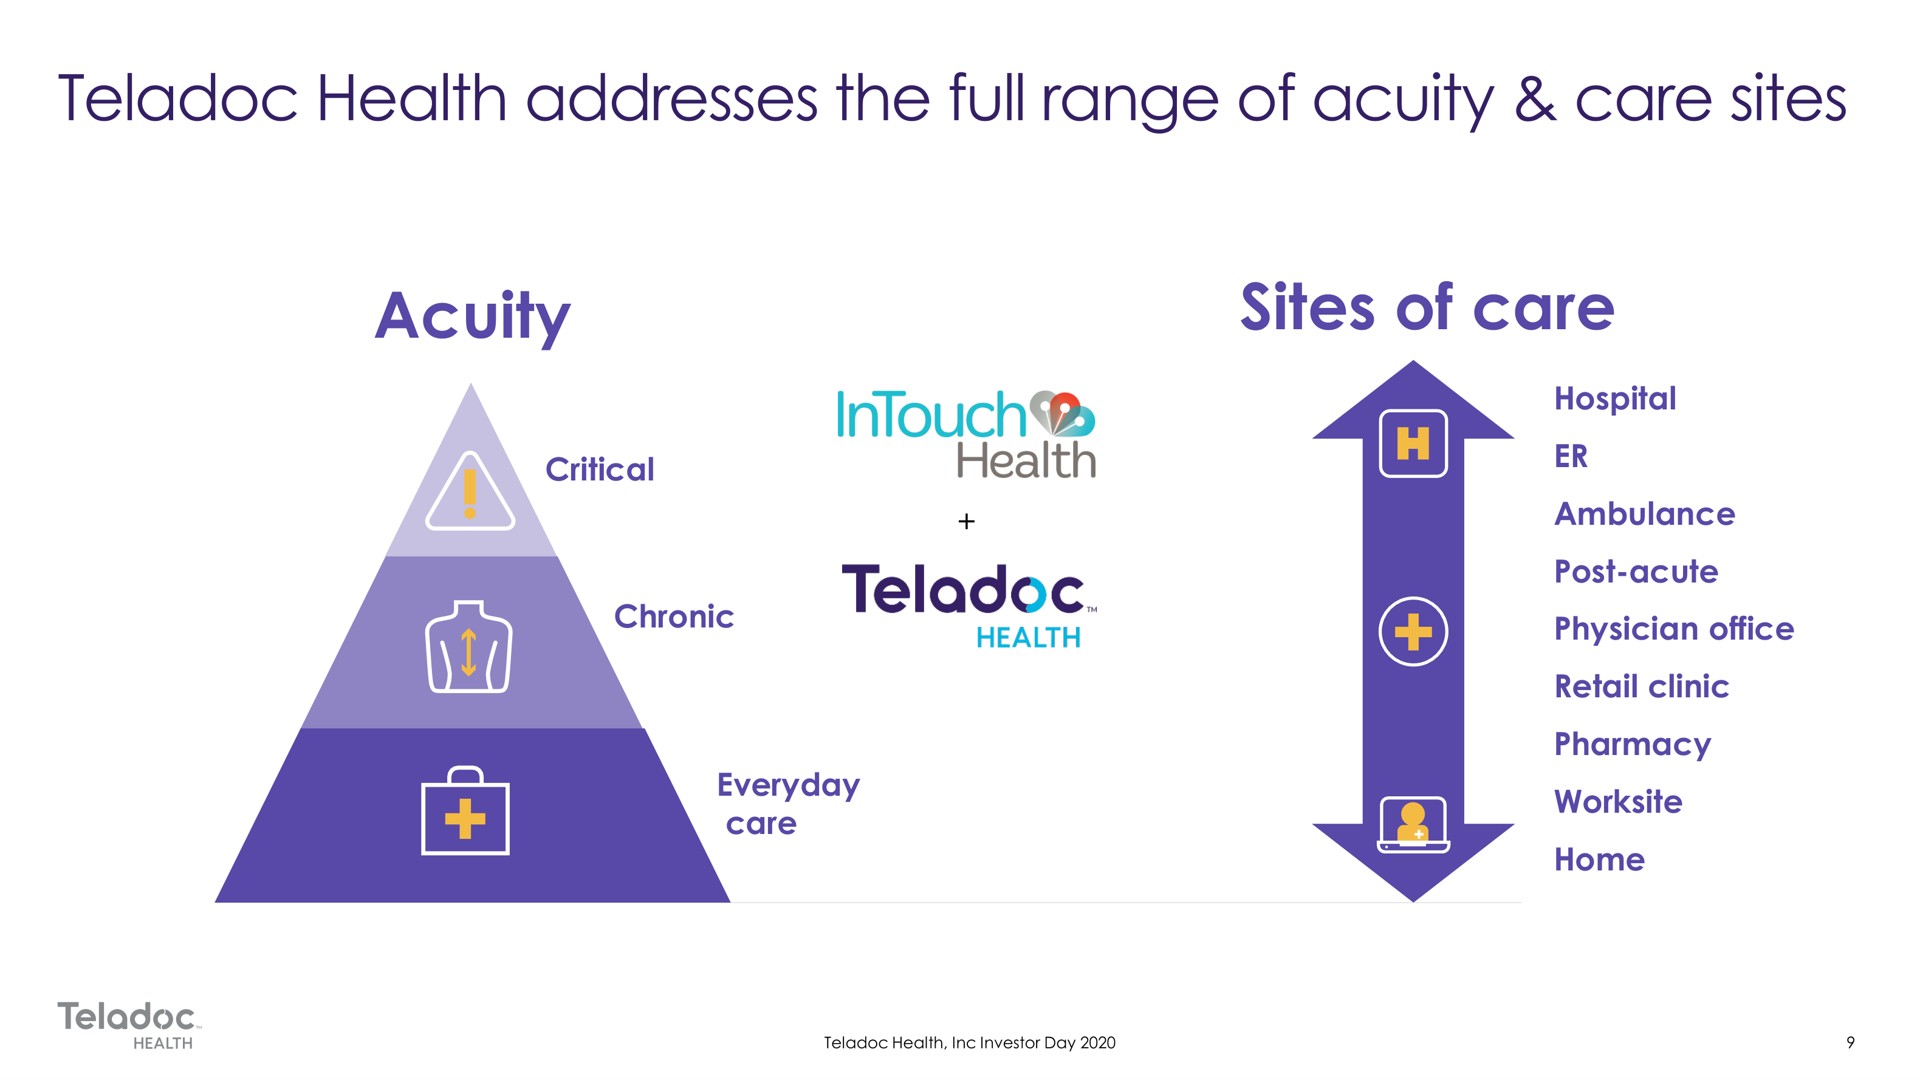 acuity sites of care critical chronic everyday care hospital ambulance post acute physician office retail clinic pharmacy home health addresses the full range | Teladoc